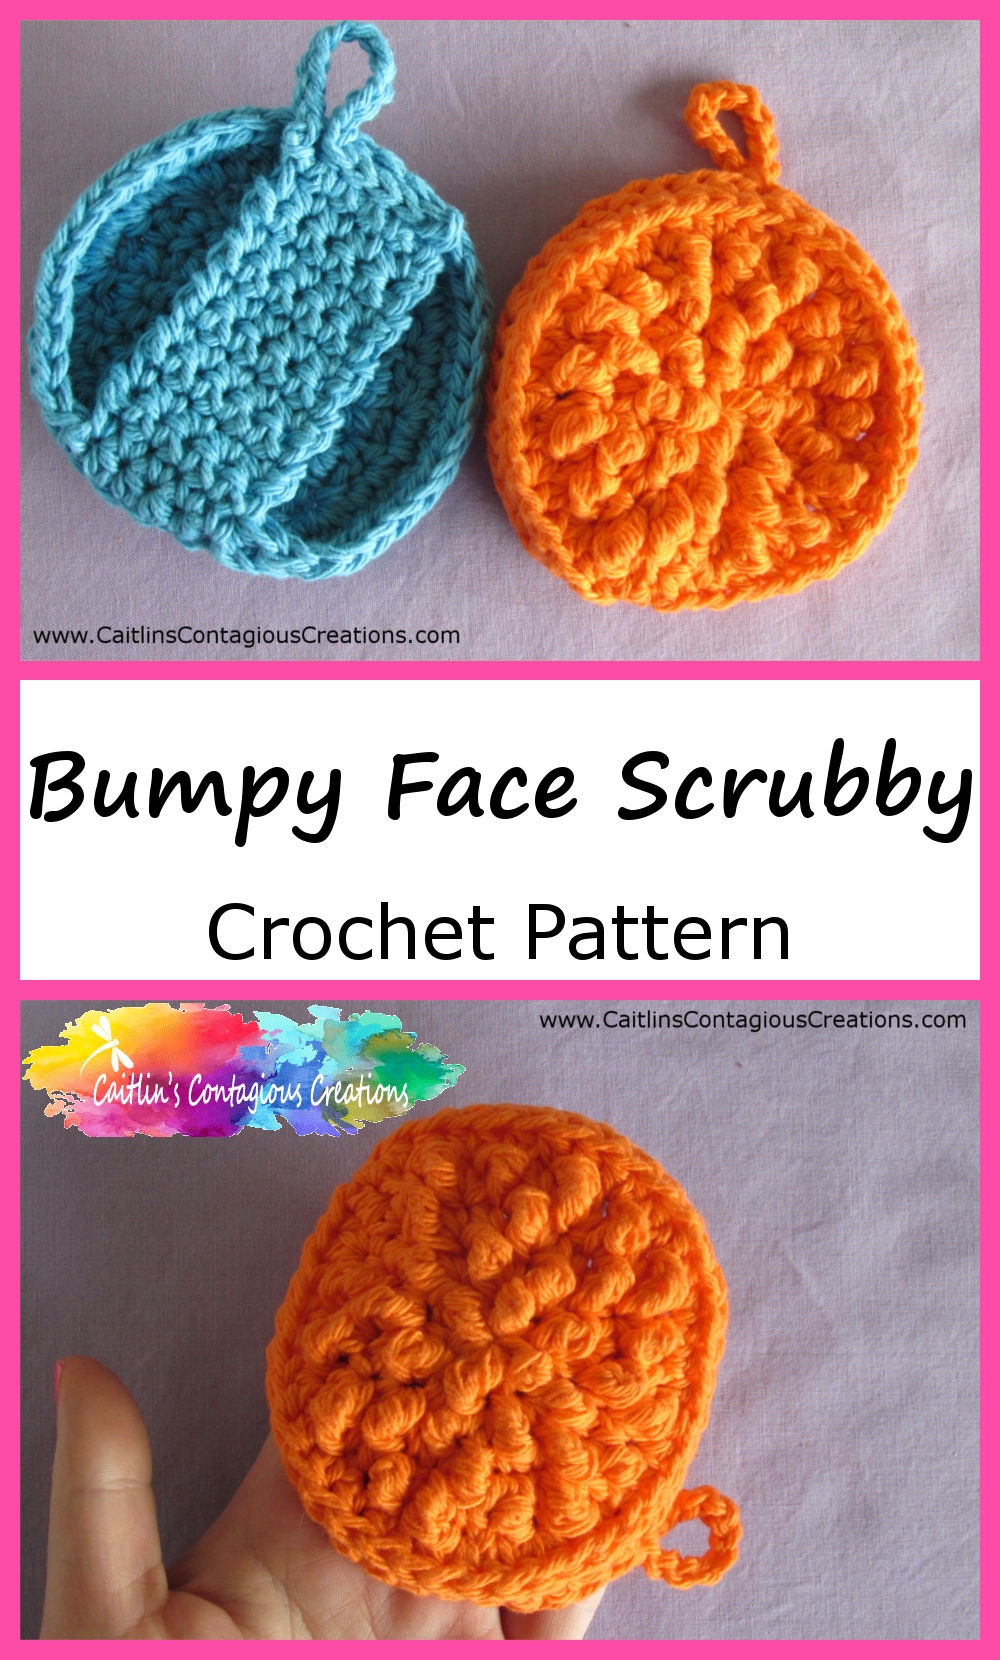 Bumpy Face Scrubby Crochet Pattern with two photos of face scrubby examples